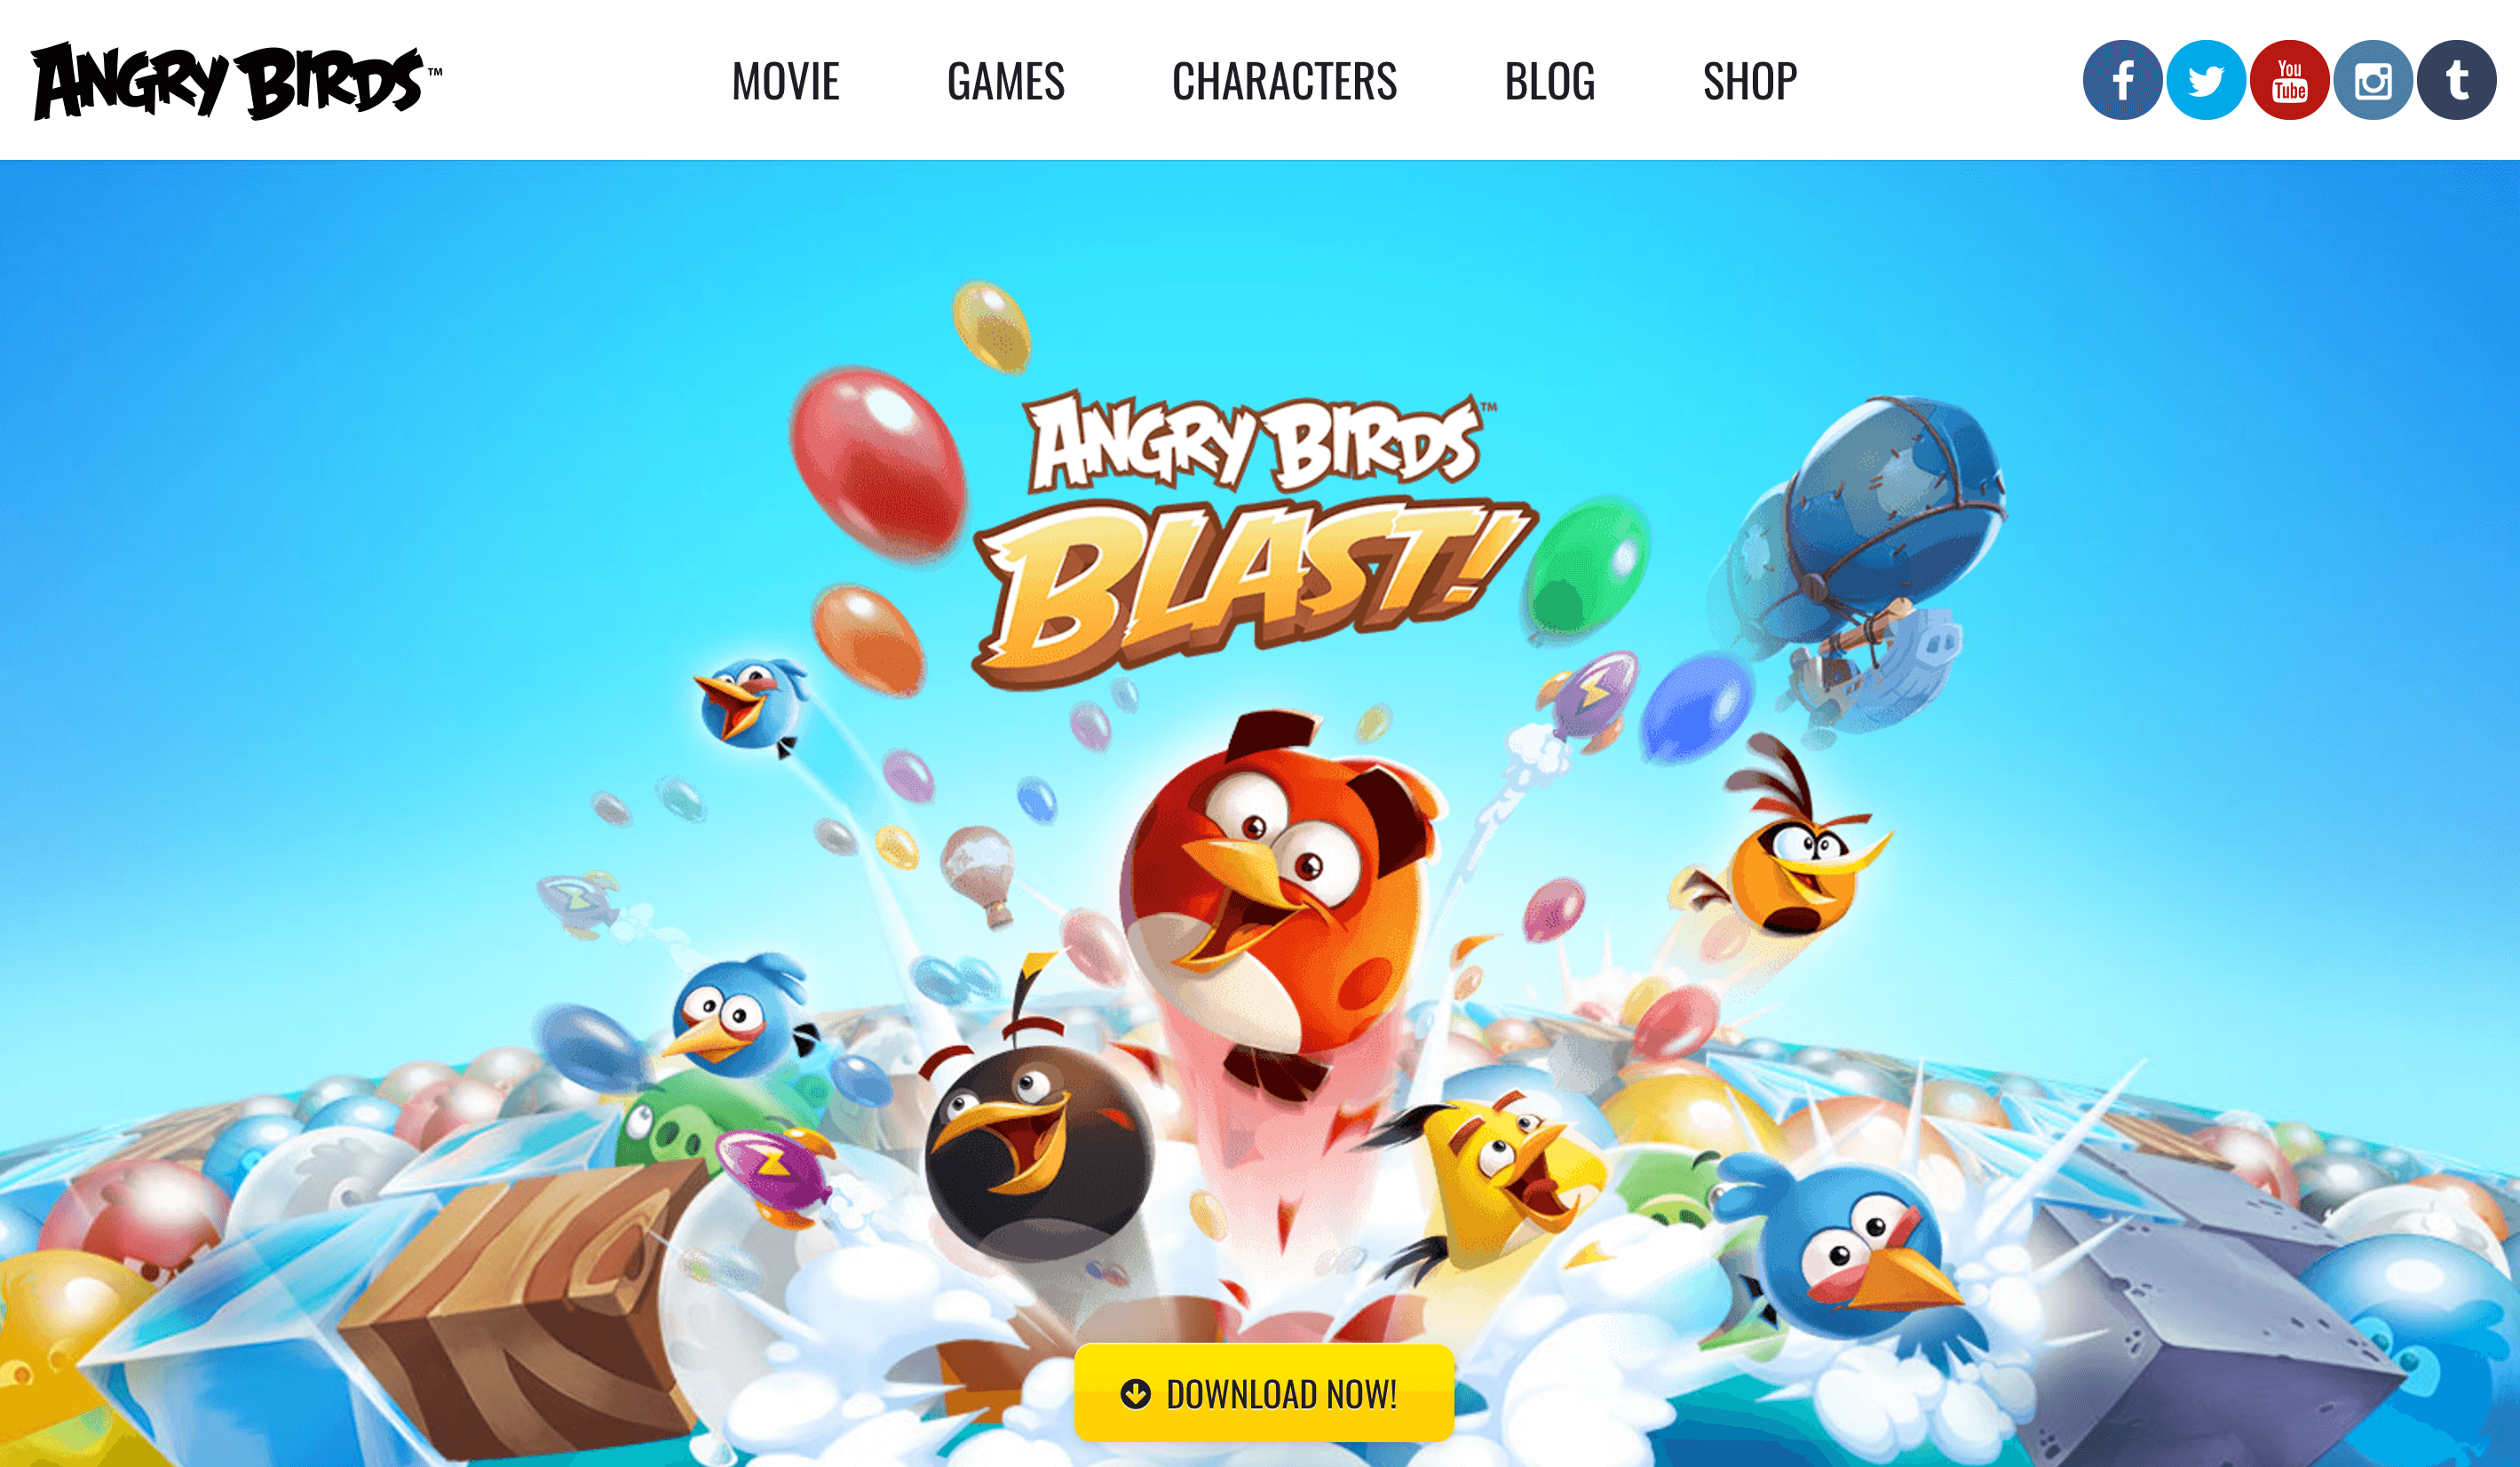 The Angry Birds home page.